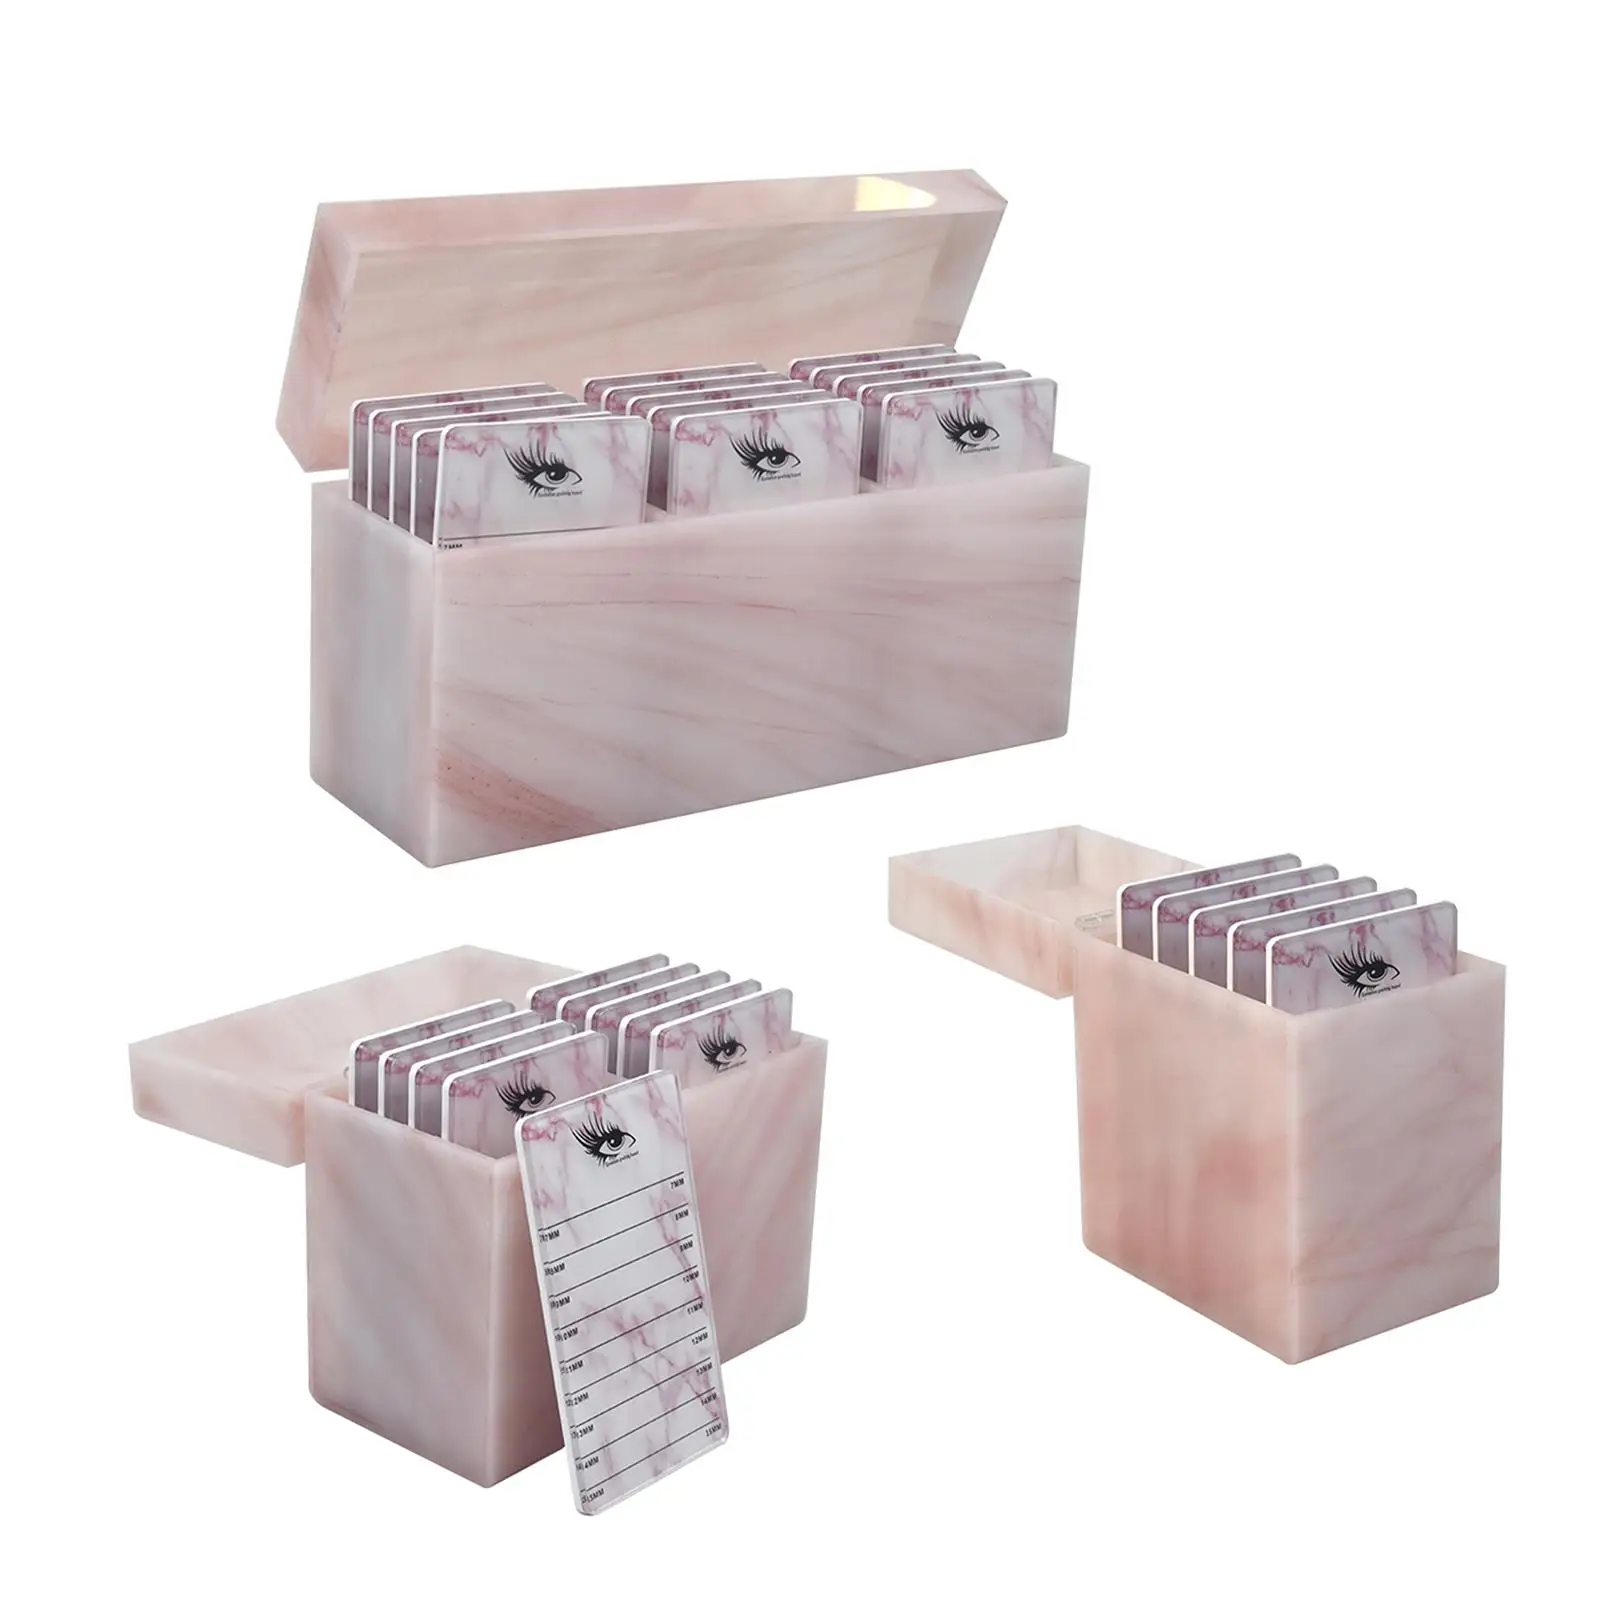 Durable Storage Holder Grafting Case Professional with Pallets Waterproof Acrylic Portable Organizer Stand